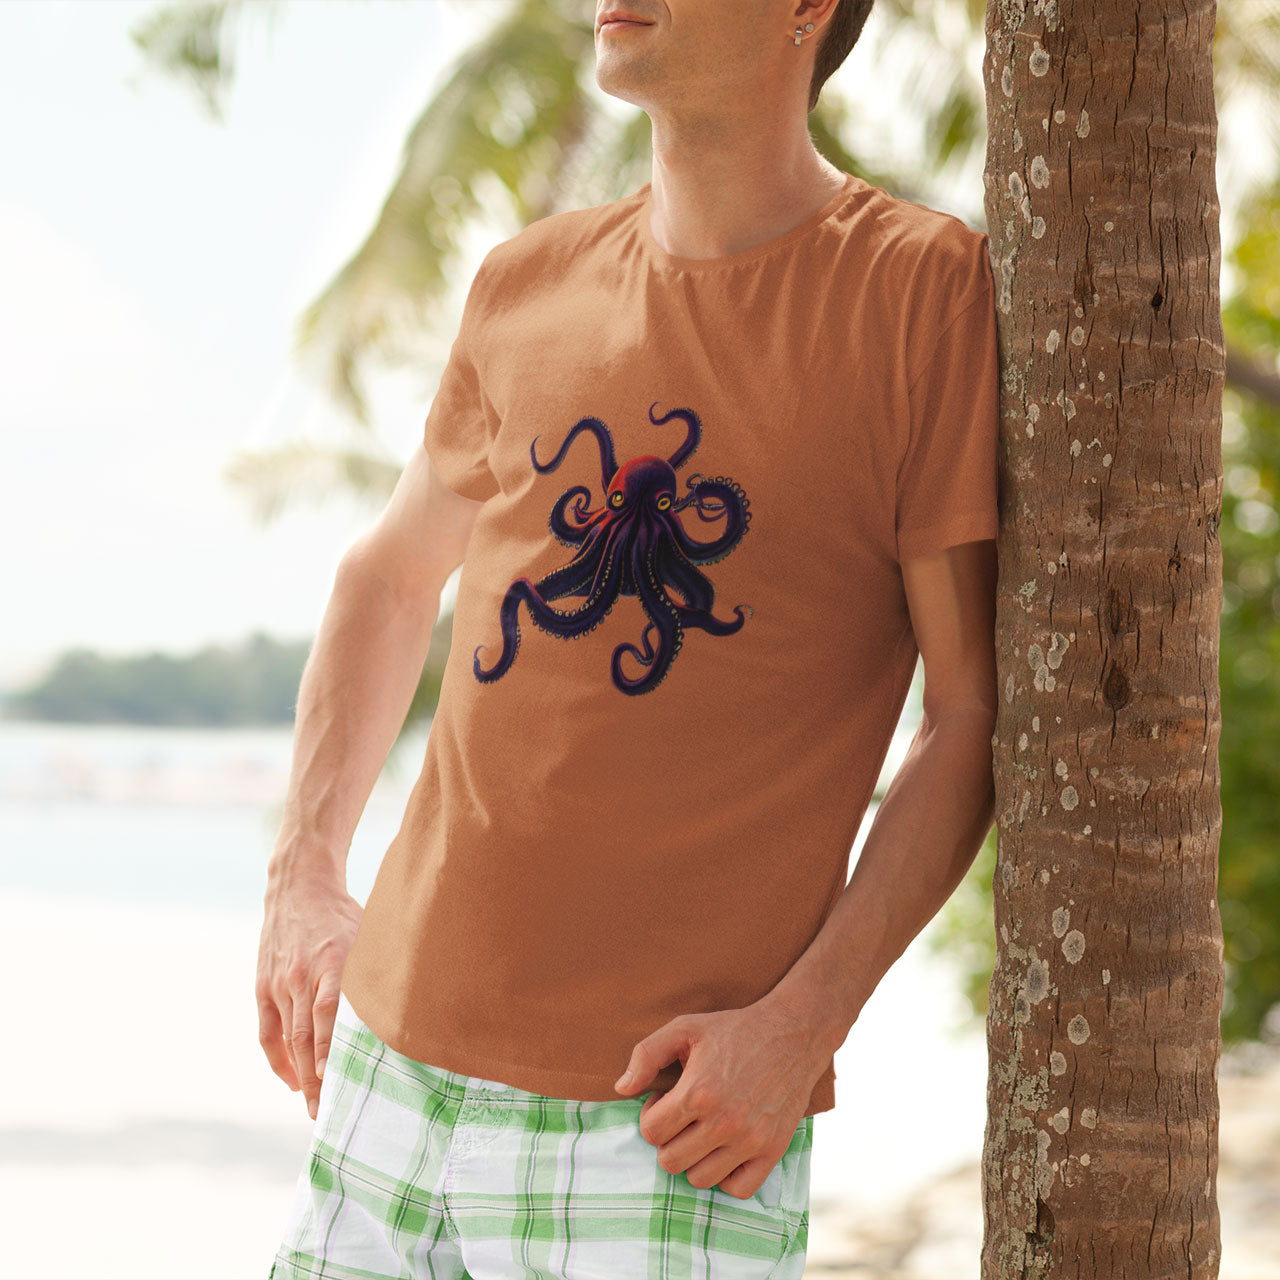 Guy leaning on a tree wearing an orange t-shirt with an octopus print